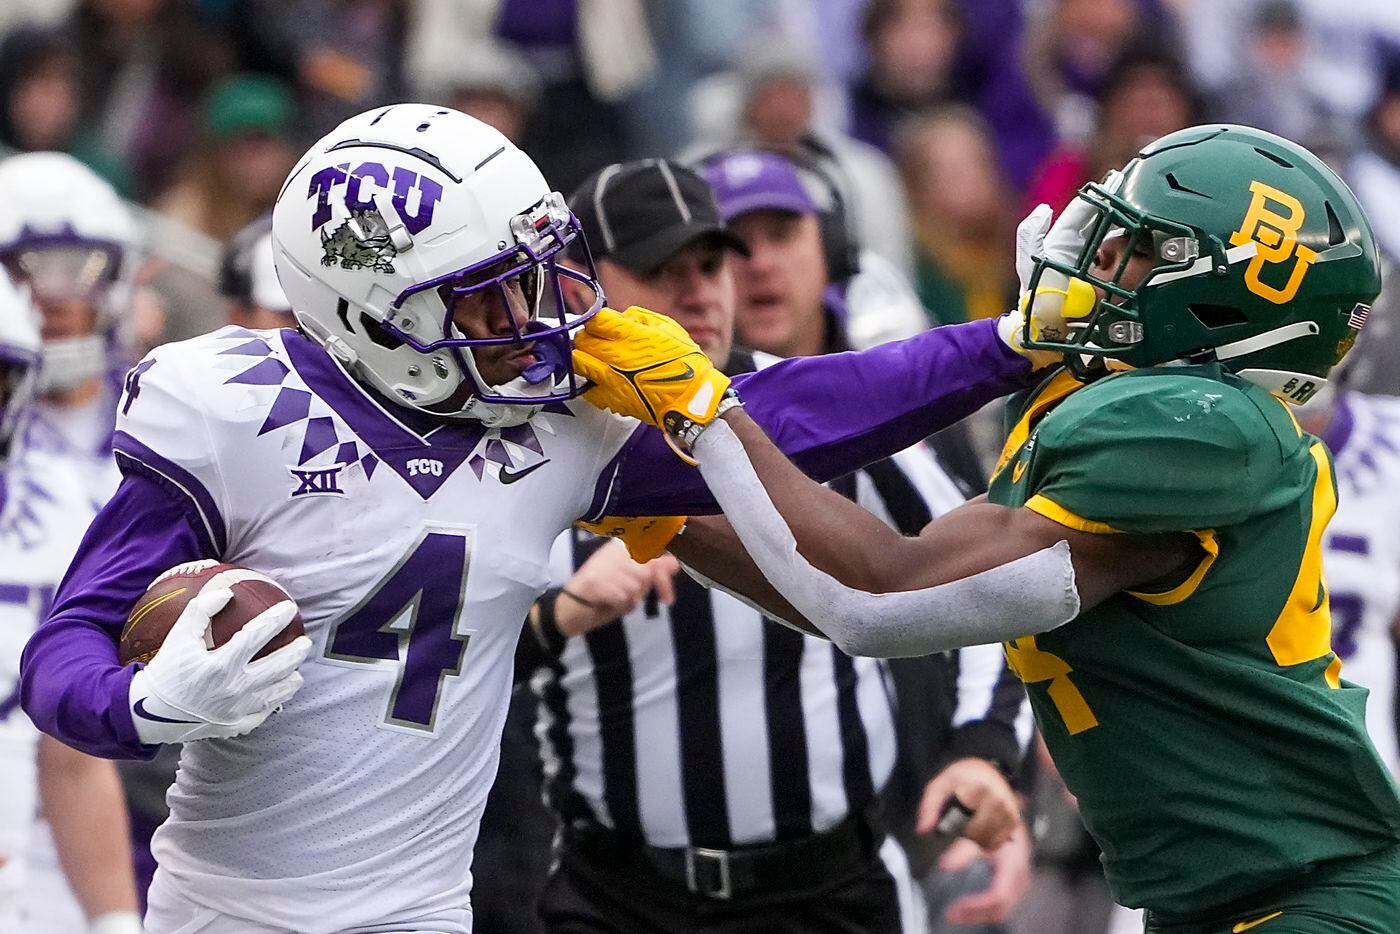 TCU wide receiver Taye Barber (4) is pulled down by Baylor linebacker Josh White (44) on a...